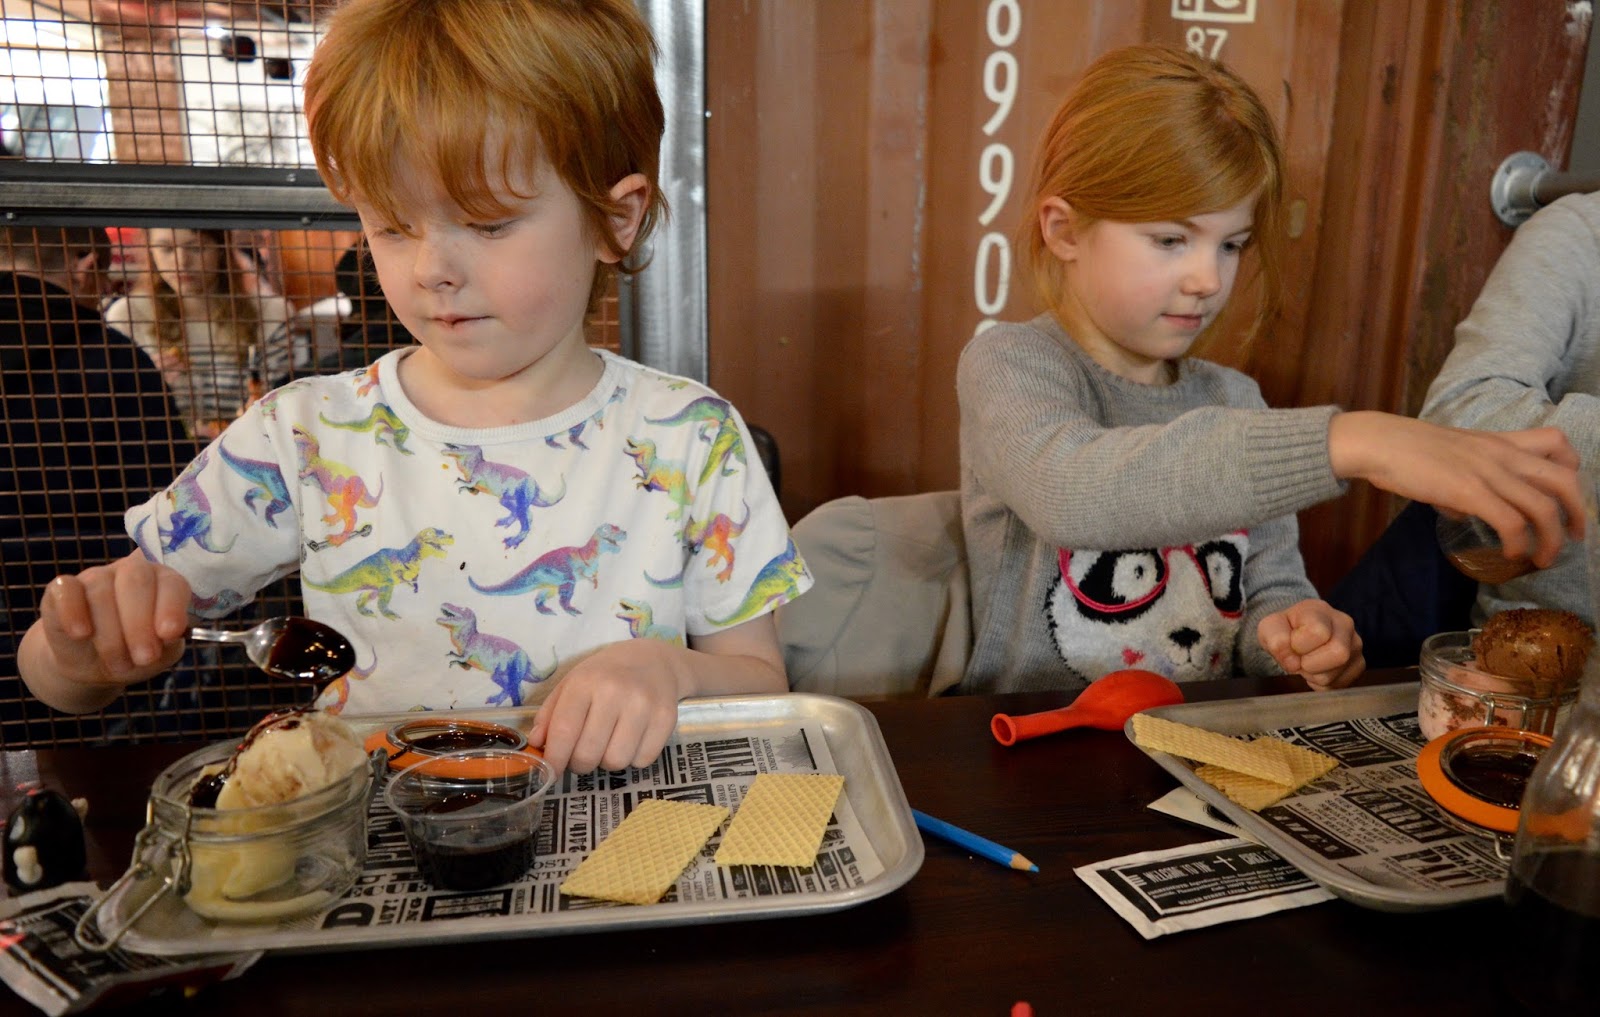 Red's True BBQ Newcastle | Menu Review (including Children's Menu) - kids create your own ice cream sundae with chocolate popping candy